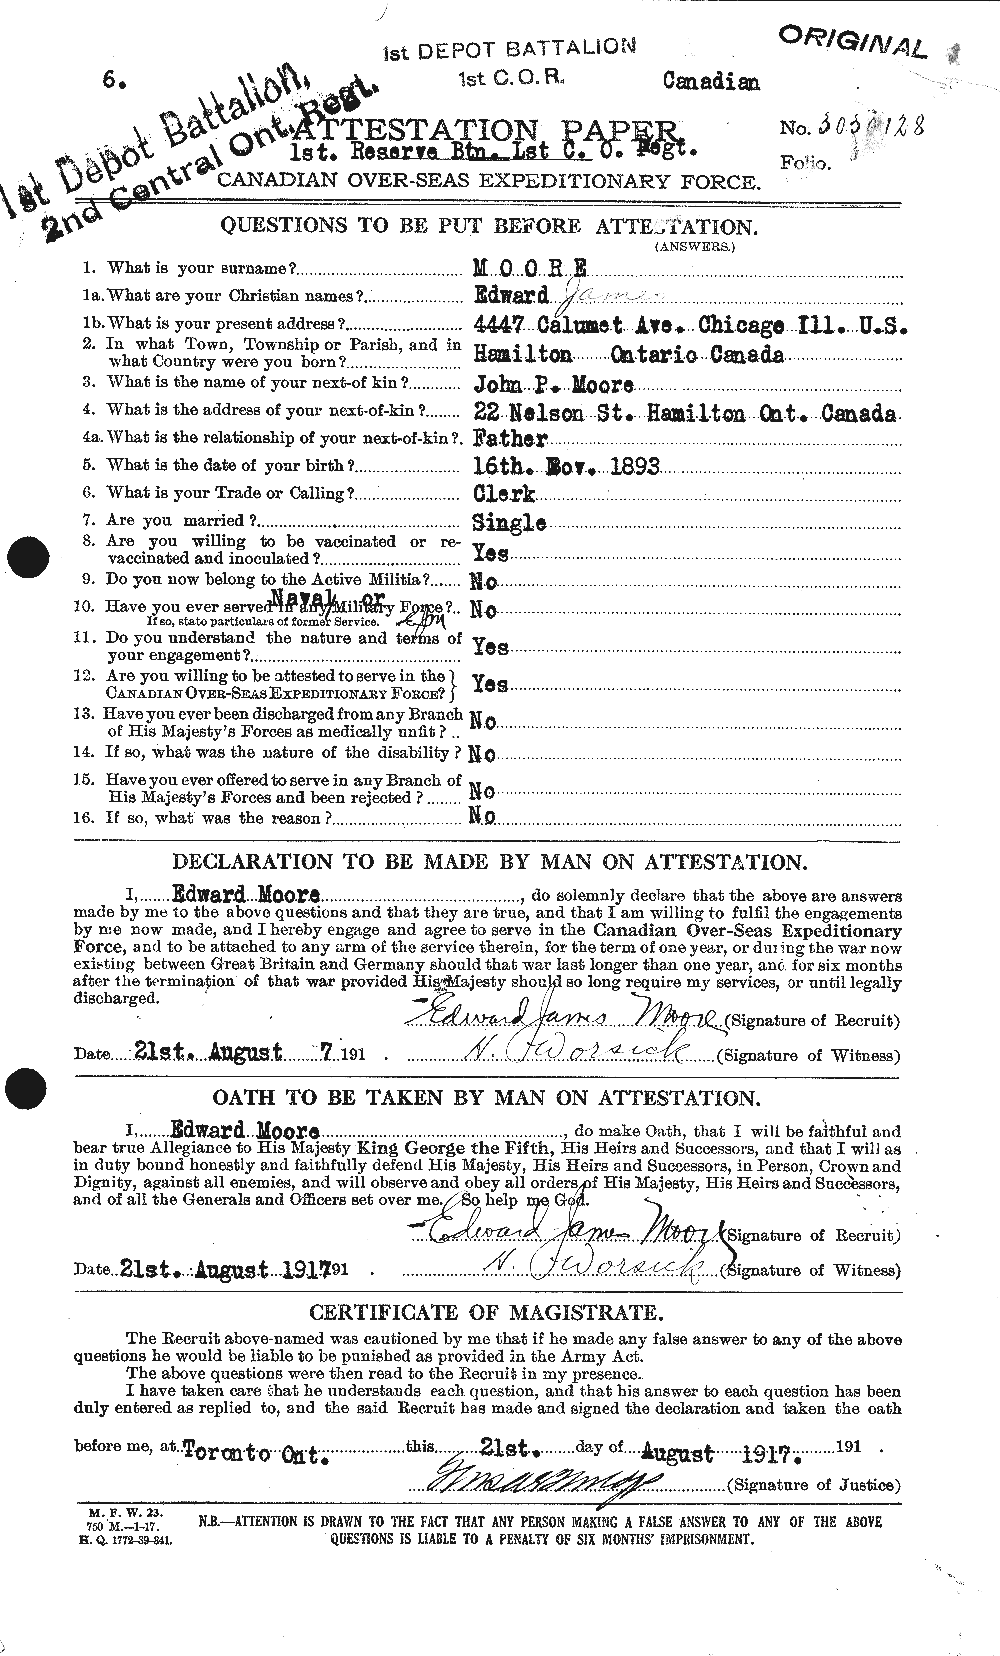 Personnel Records of the First World War - CEF 506634a